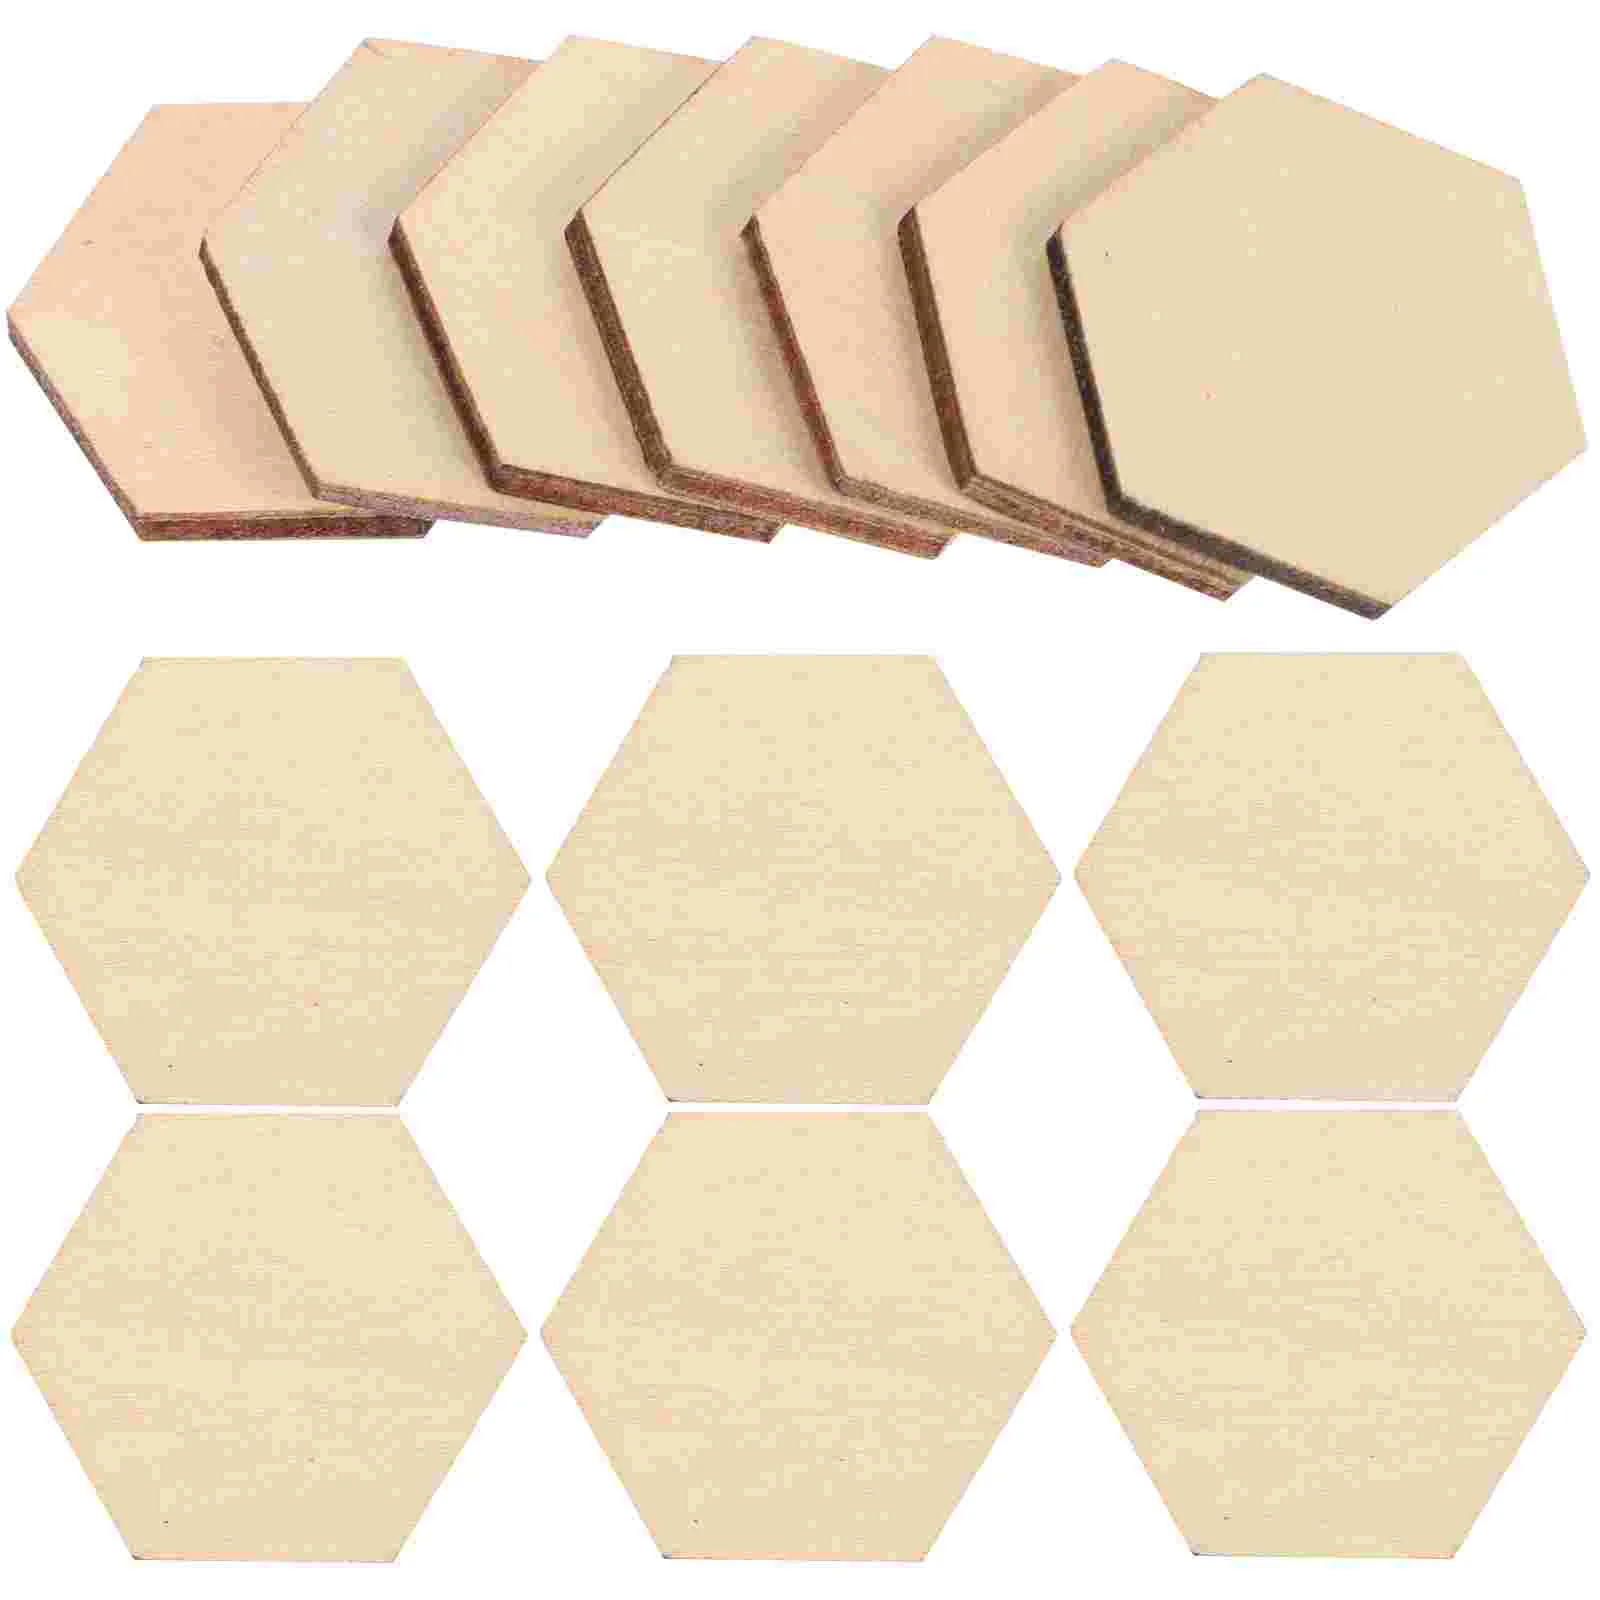 

100PCS 22 5MM Wood Geometric Cutout Small Wood Hexagon Block Tile Label DIY Coloring Painting Wooden Pieces Pendant for